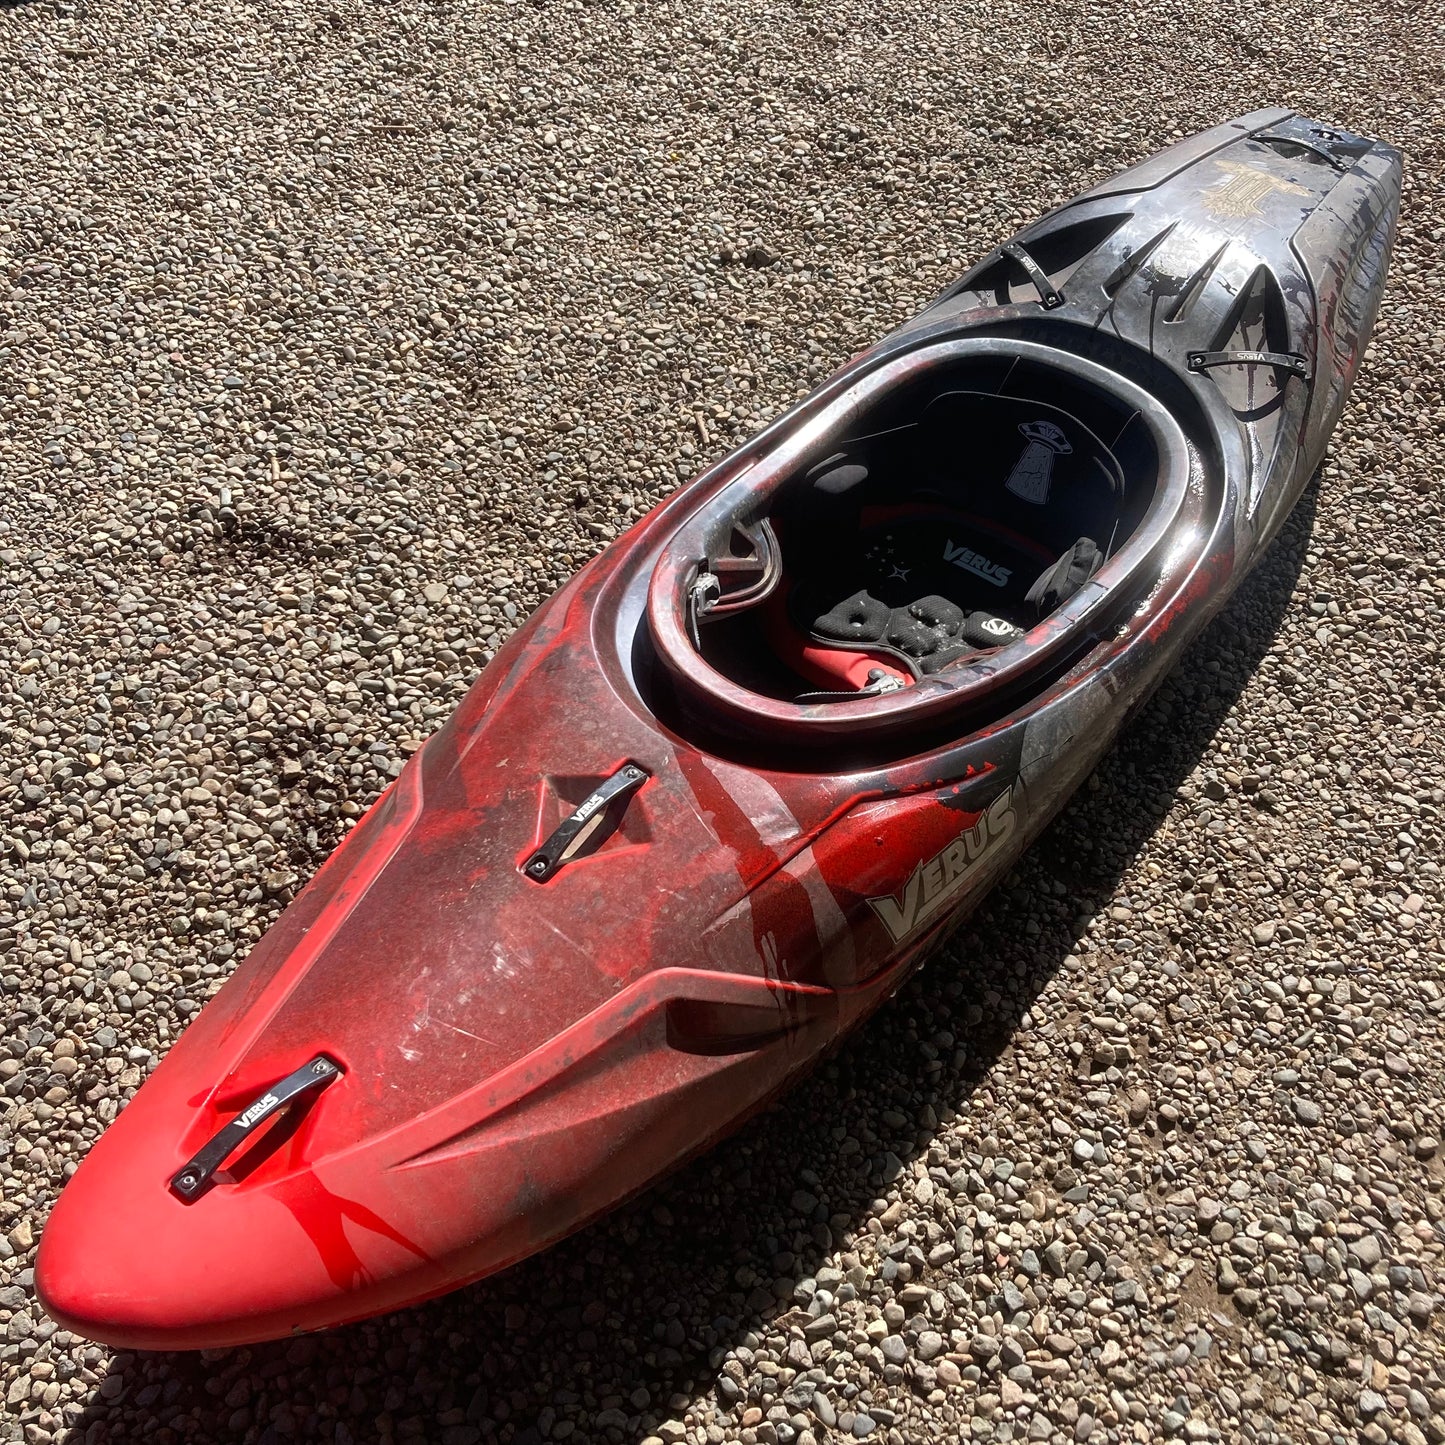 A red and black Verus kayak laying on gravel.